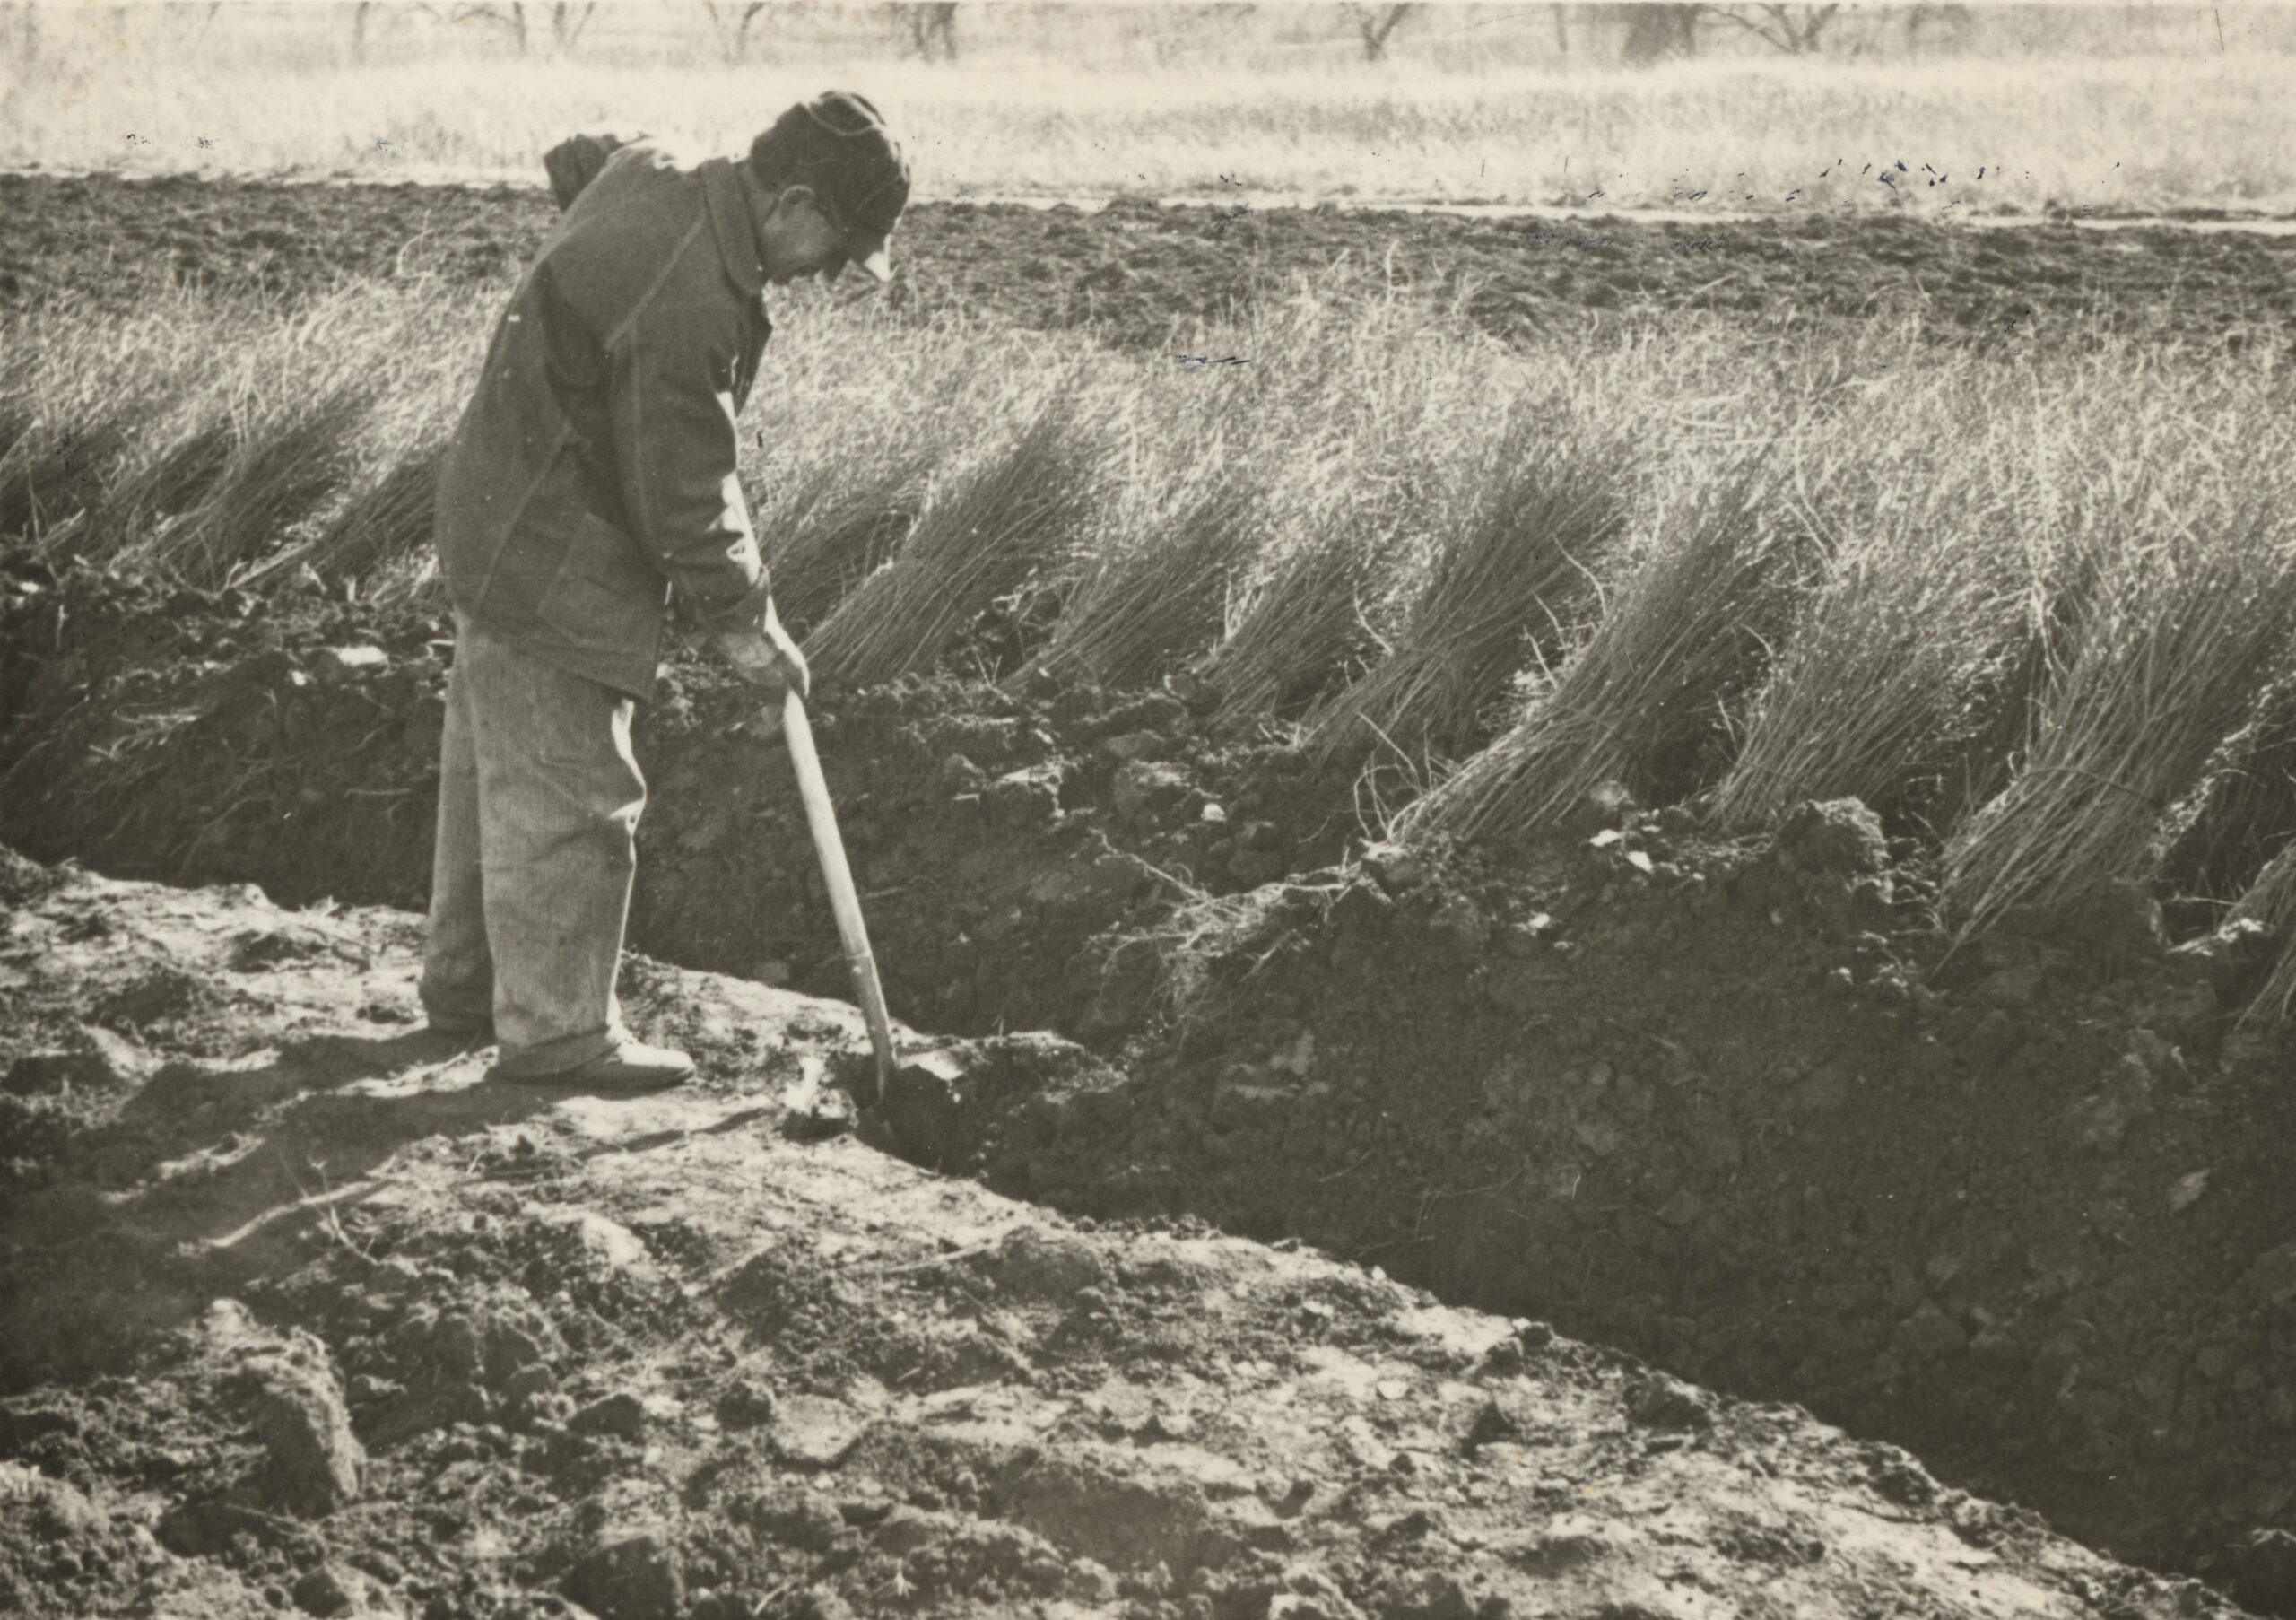 Vintage image of a gentleman prepping the soil for planting.